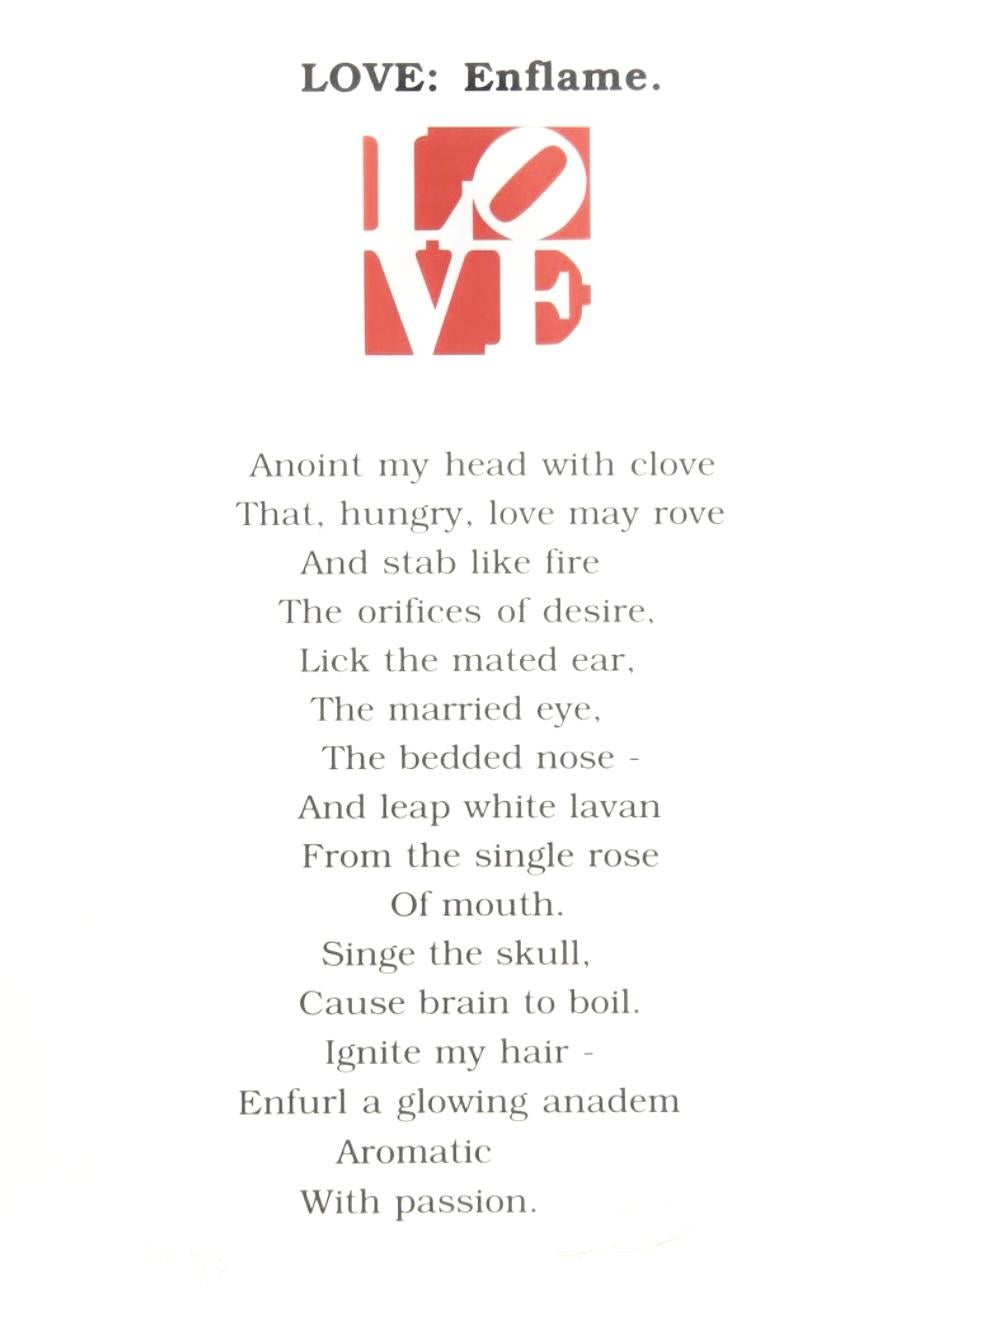 LOVE: Enflame (From The Book of Love Portfolio) - Print by Robert Indiana